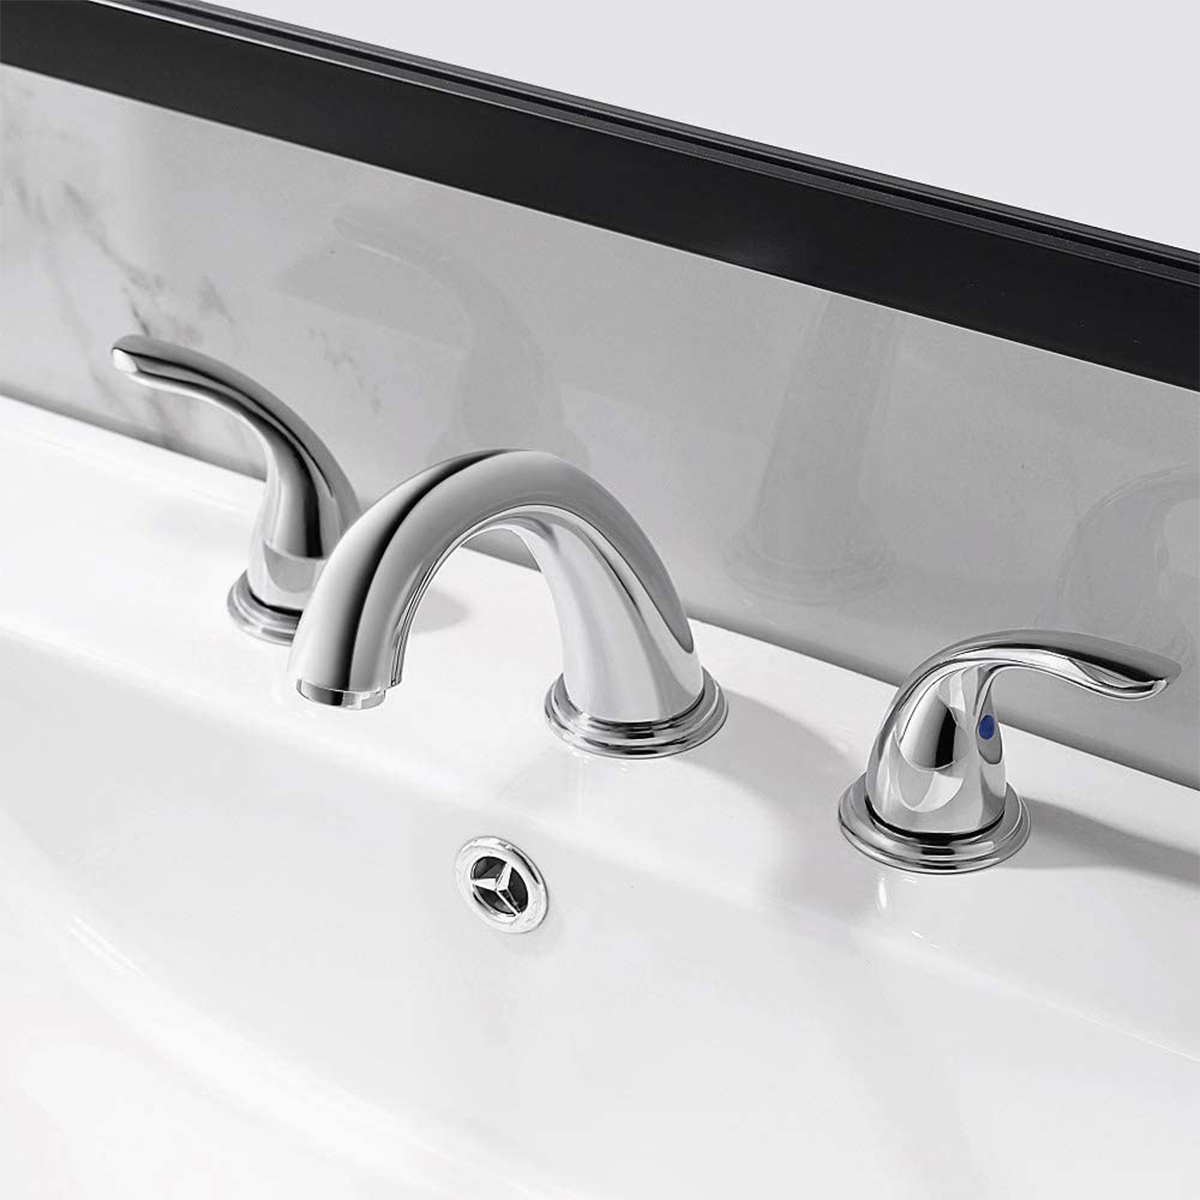 Aquacubic Polished Chrome Widespread 2 Handle 3 Hole Bathroom Basin Sink Faucet with Drain Assembly